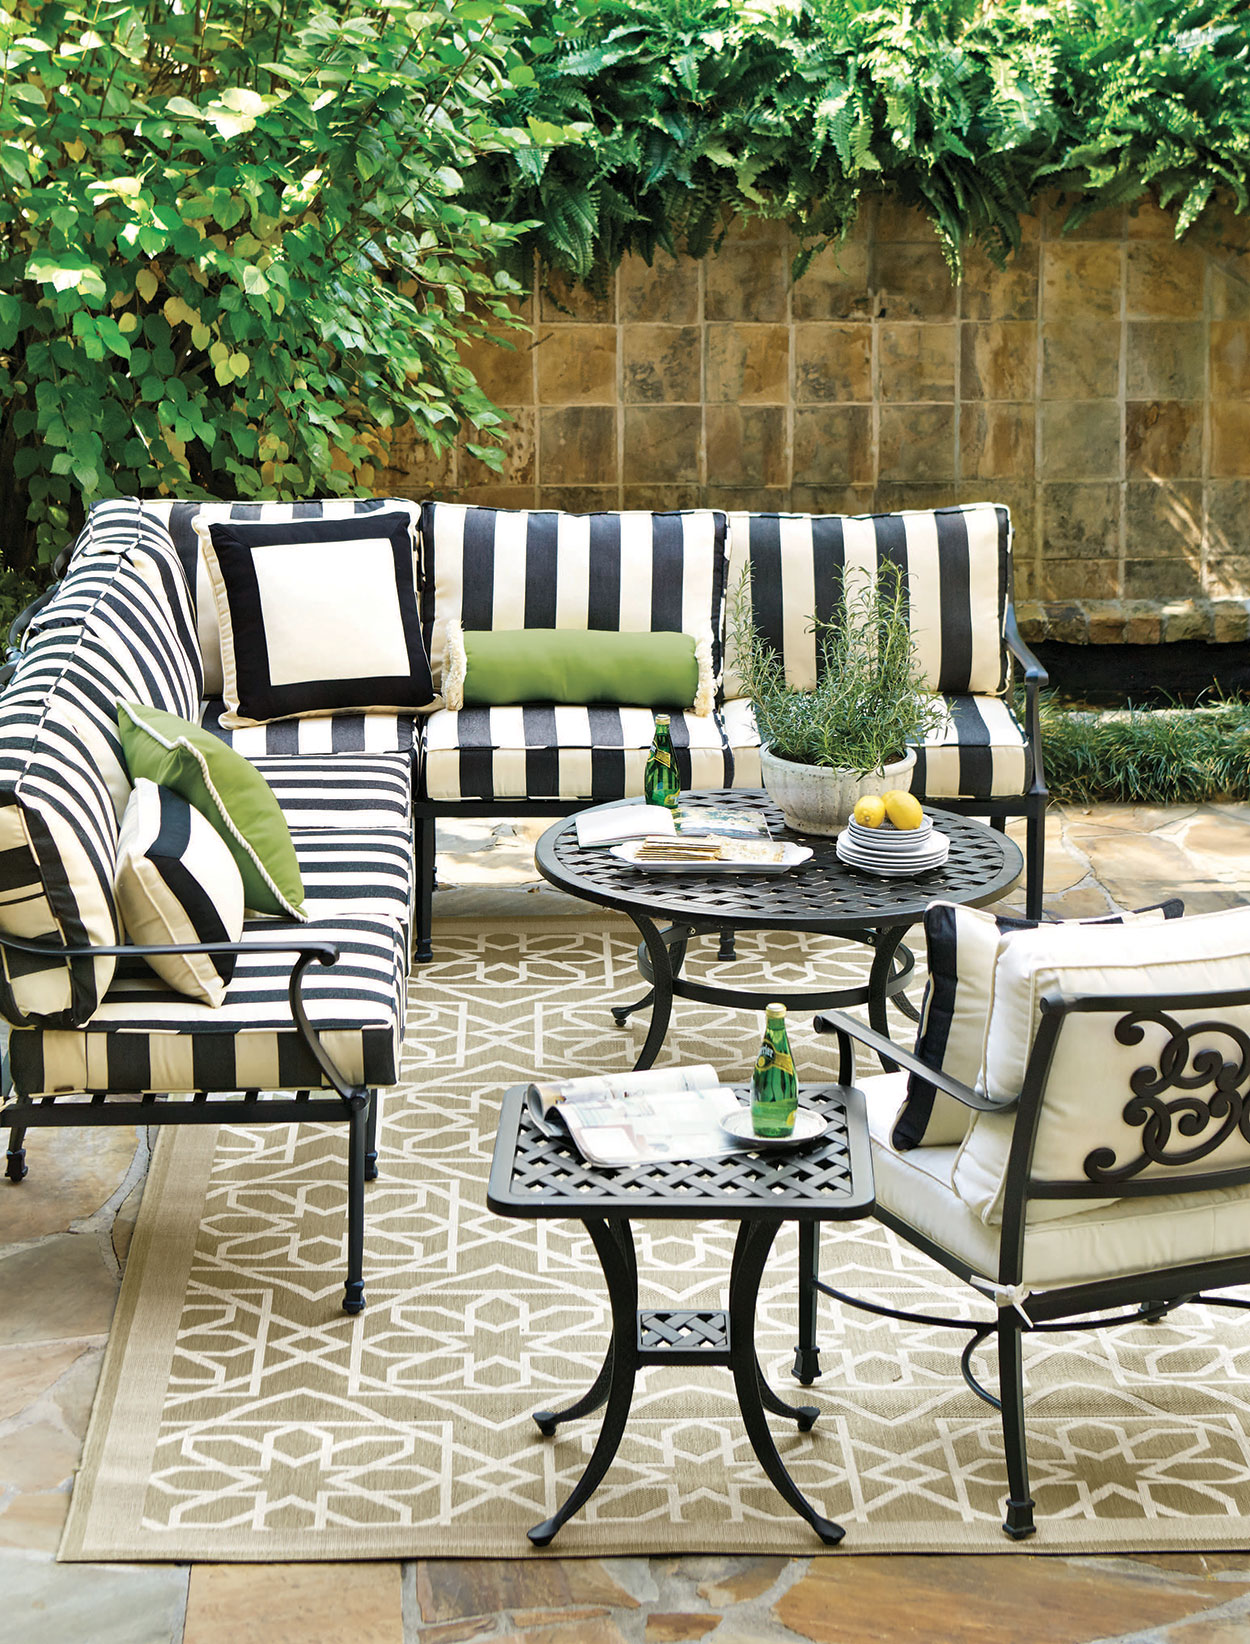 How To Style Outdoor Seating Area-The Guide For Beginners